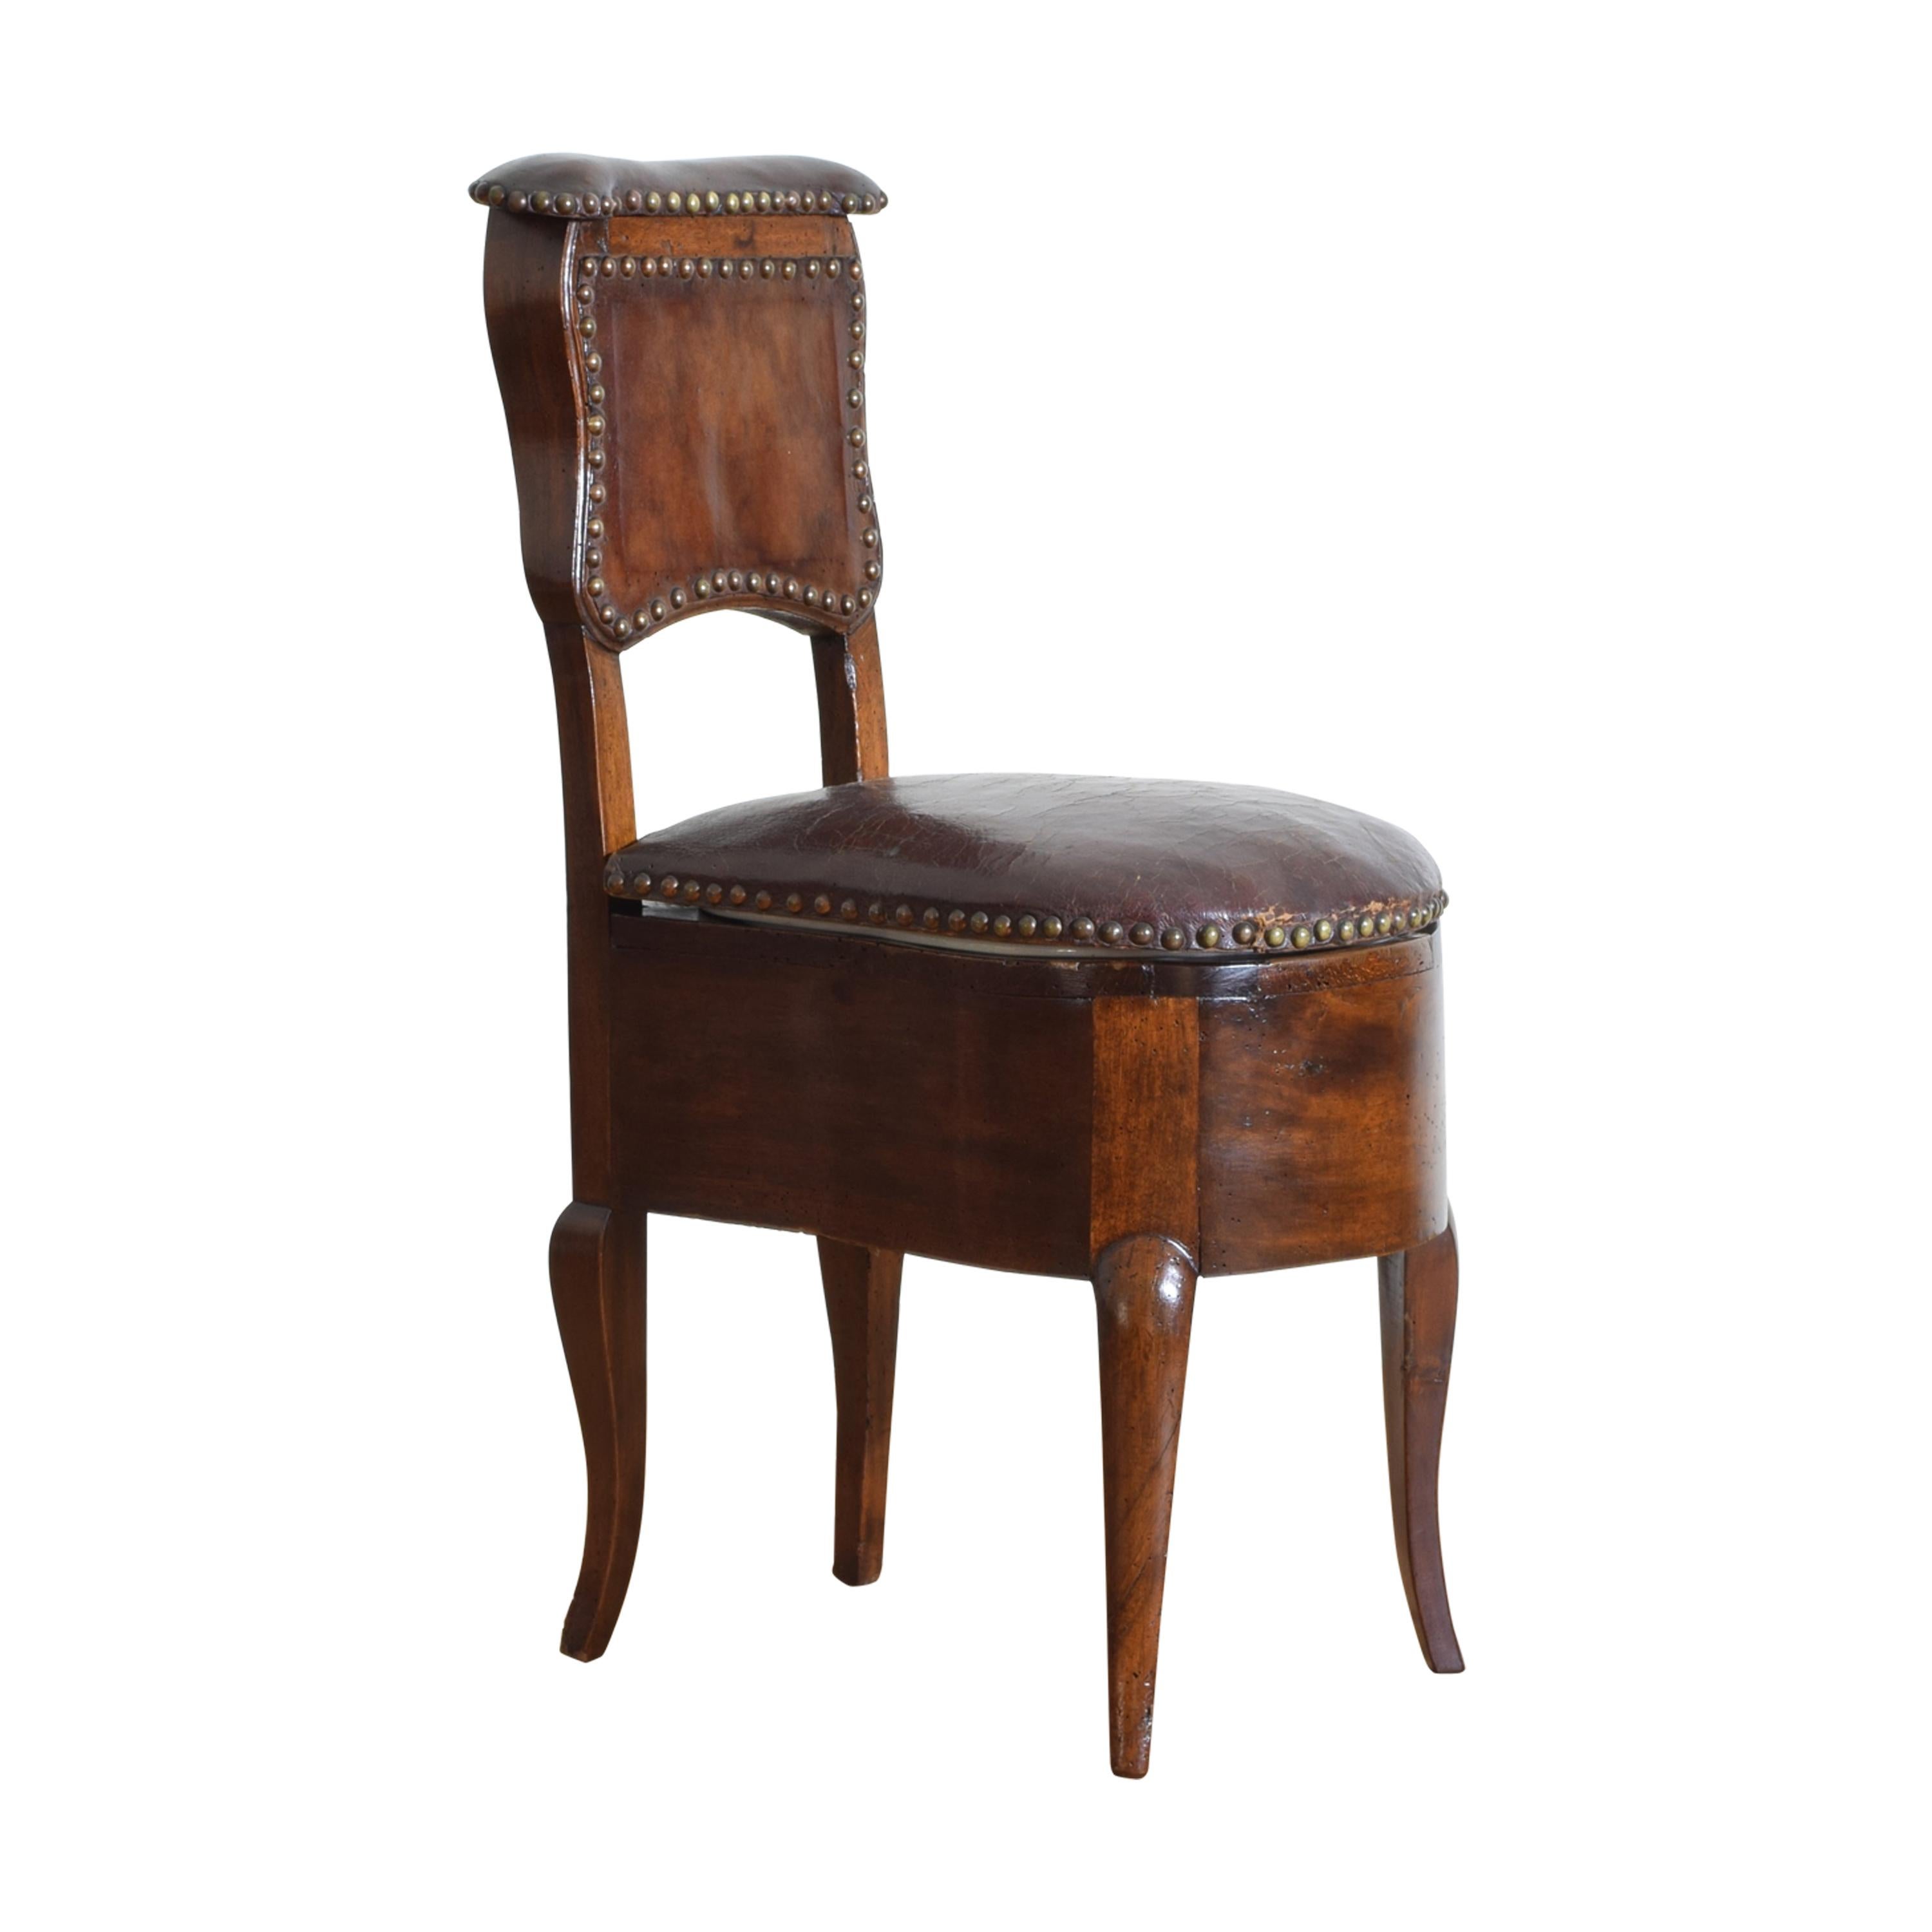 French Louis XV Walnut and Leather "Le Confident de ses Dames", Mid-18th Century